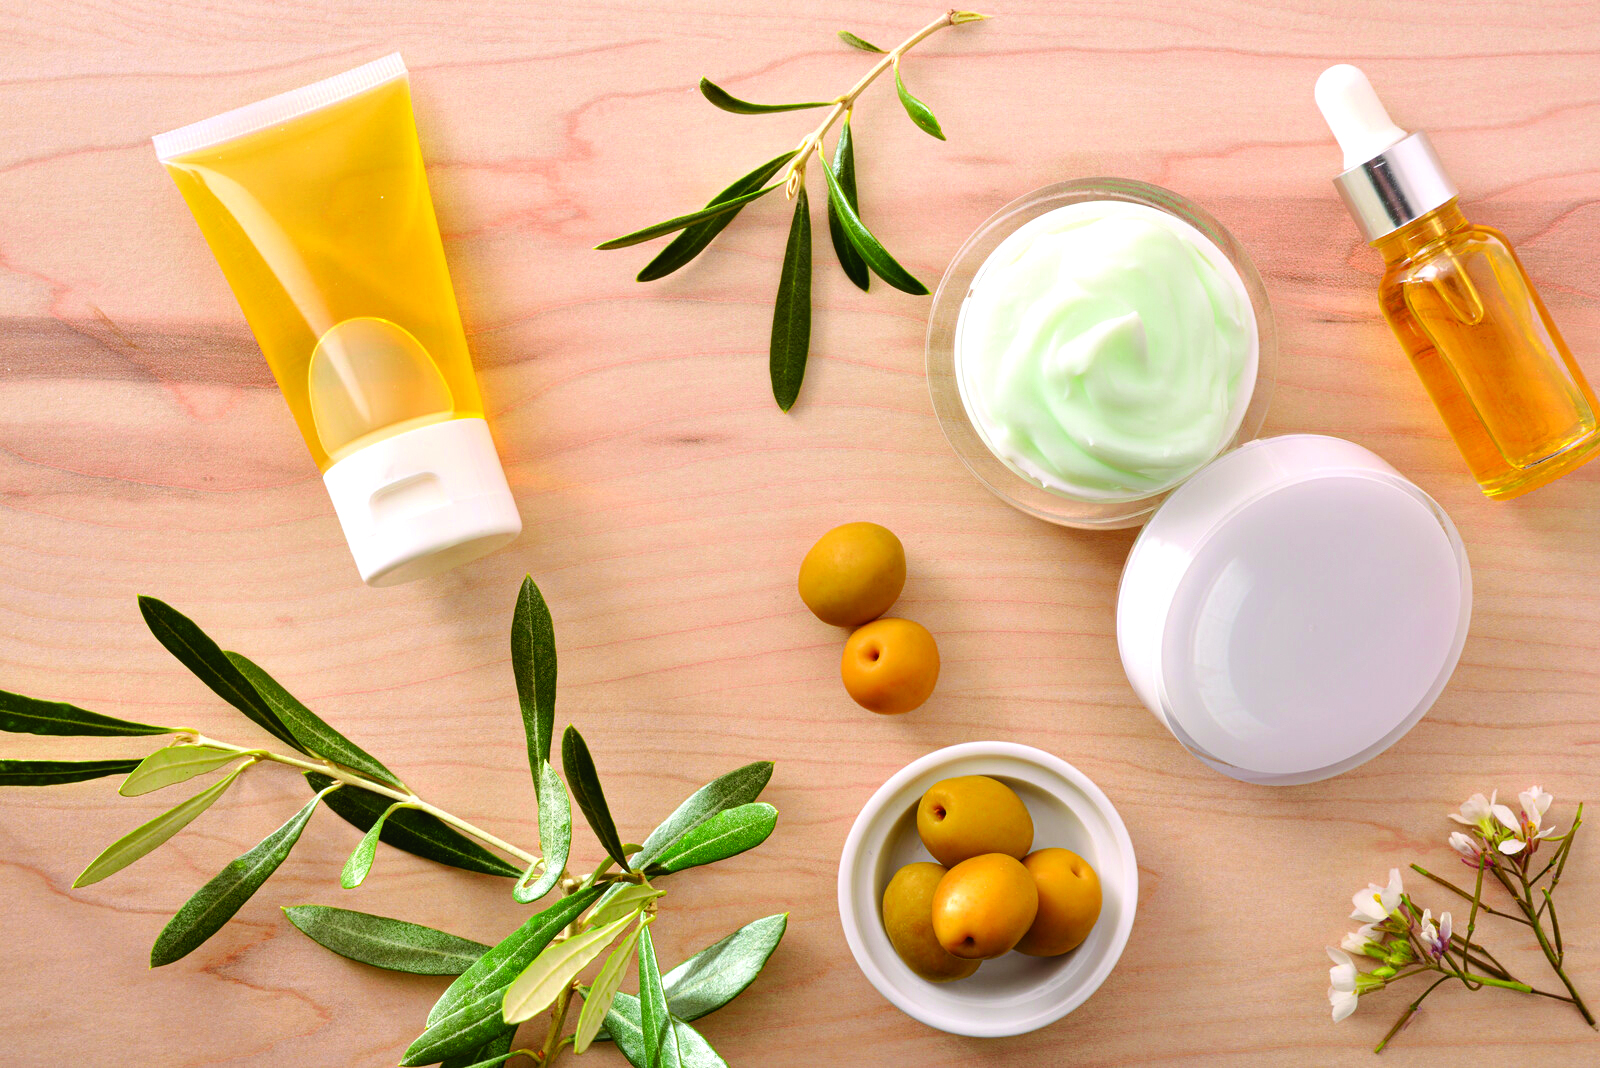 skincare products, olives and rosemary